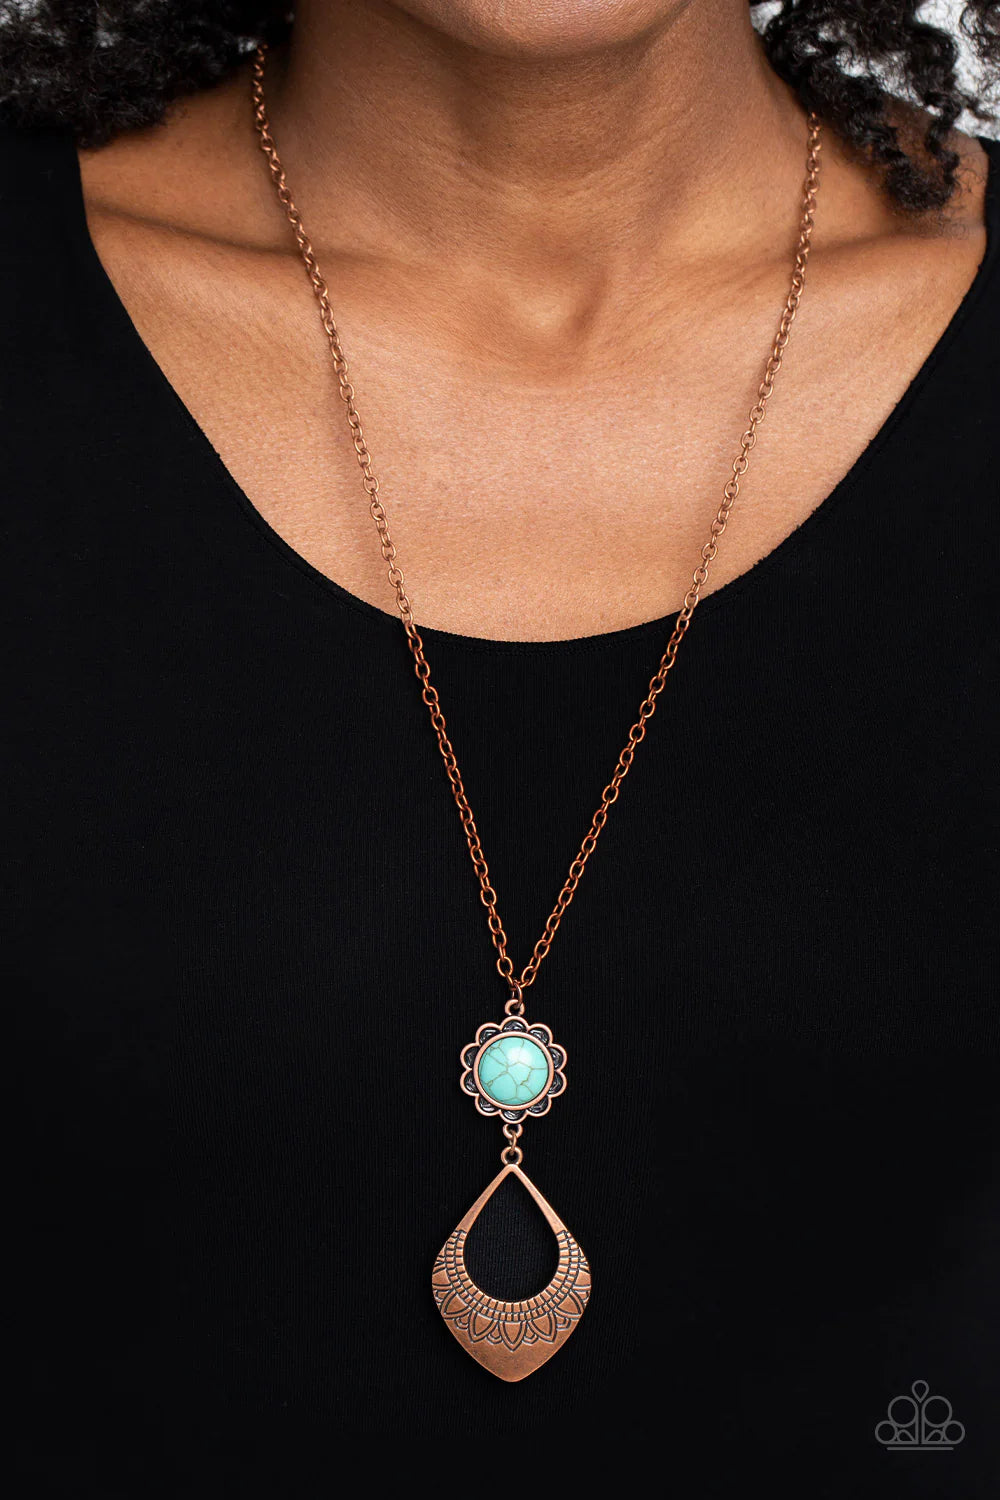 Paparazzi Accessories Stone Toll - Copper Dangling from an elongated, copper link chain, two whimsical, interconnected shapes coalesce down the chest. An oversized turquoise stone, wrapped in a copper floral frame swings as the uppermost shape above an ov